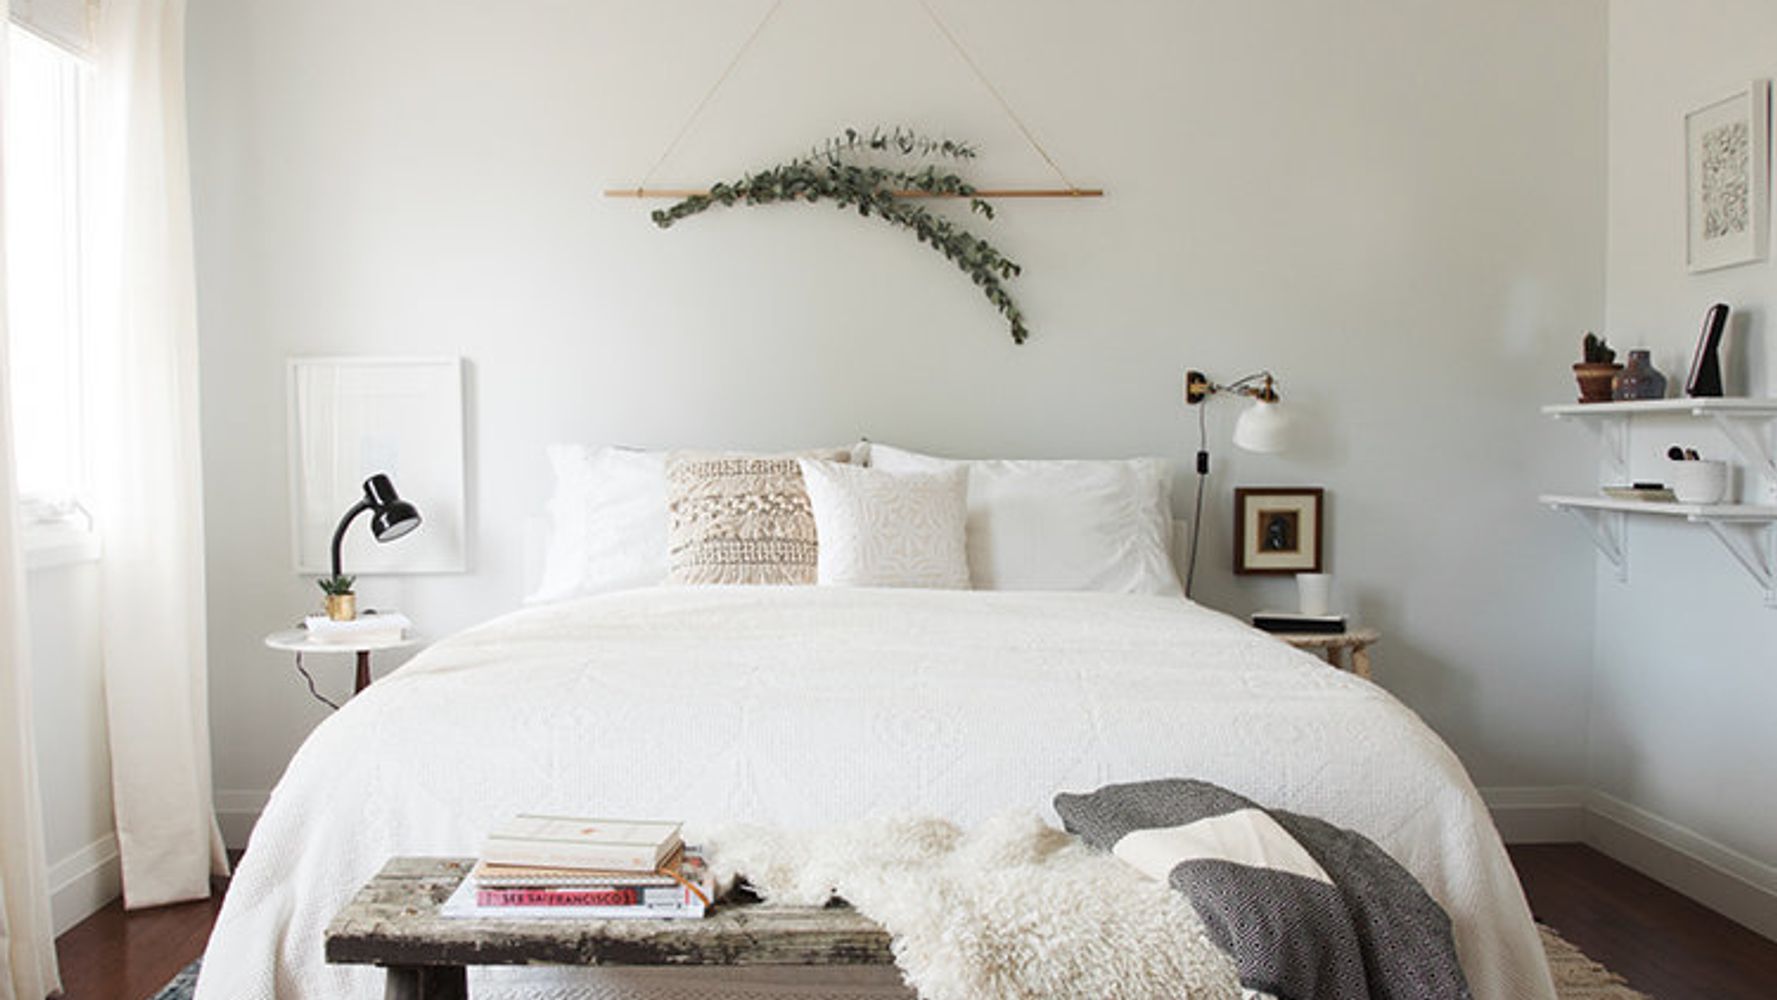 Diy Above The Bed Wall Decor Ideas : The space above the headboard is